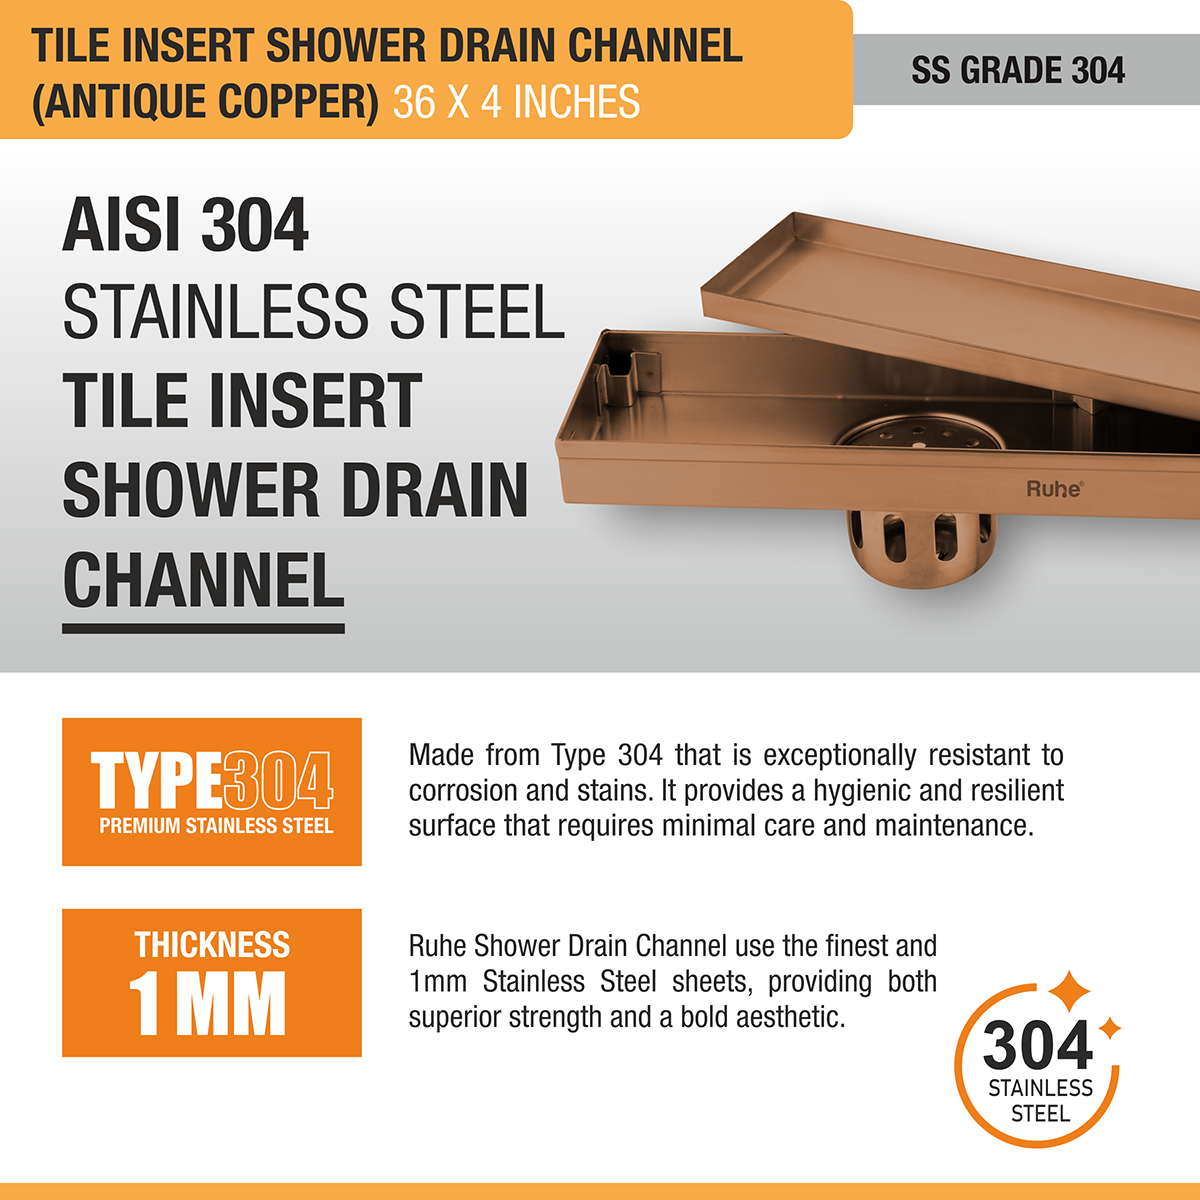 Tile Insert Shower Drain Channel (36 x 4 Inches) ROSE GOLD PVD Coated stainless steel